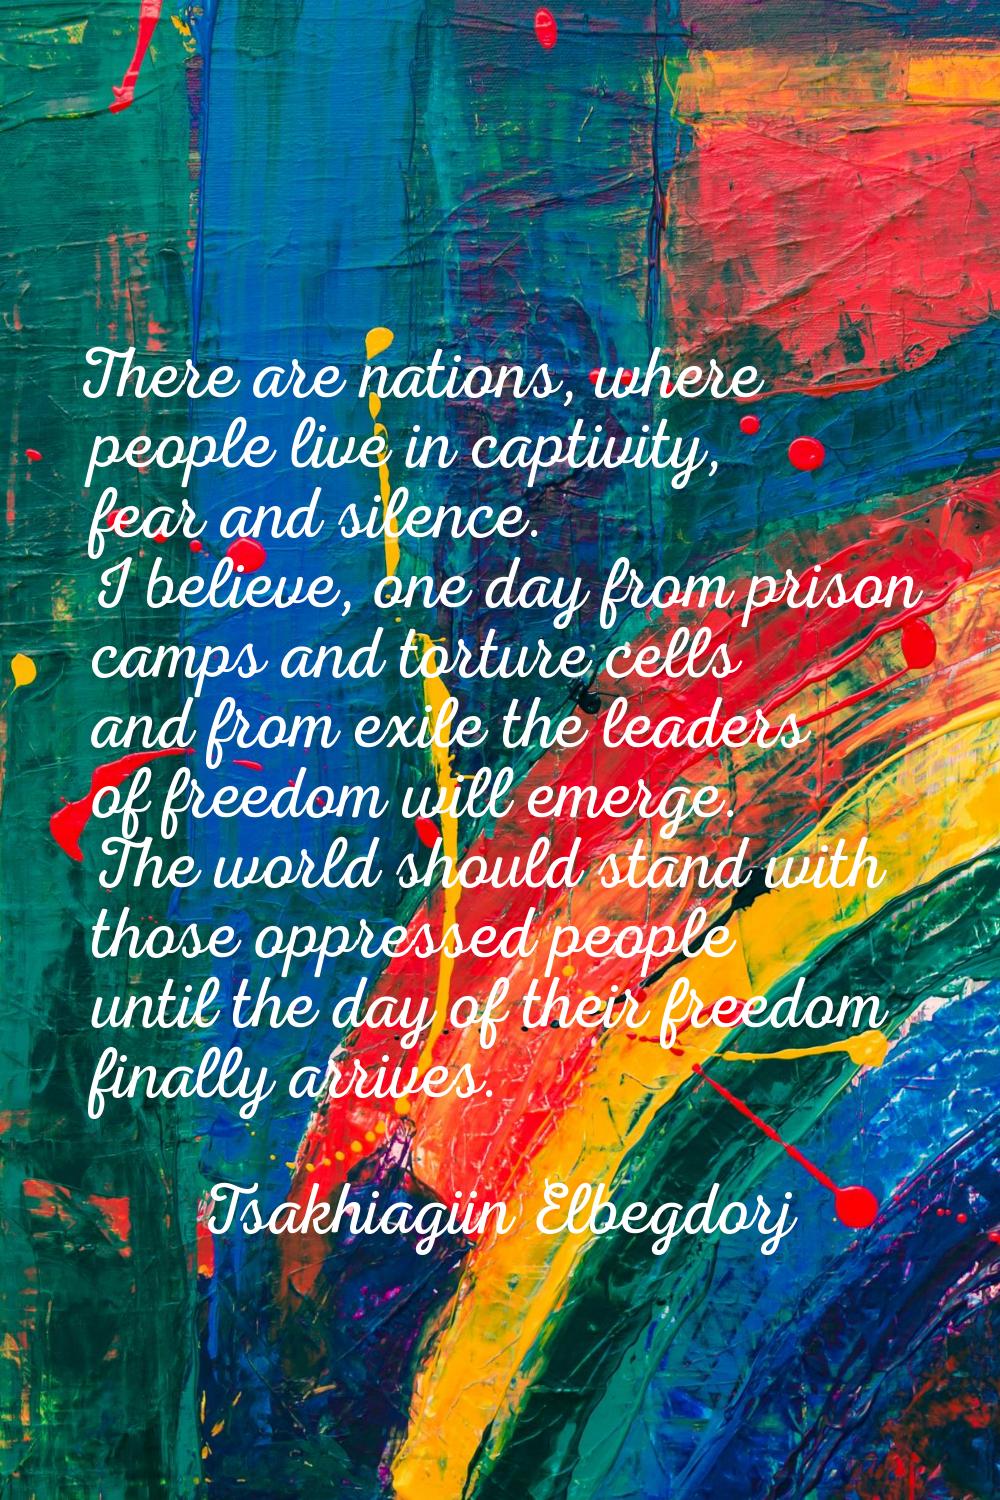 There are nations, where people live in captivity, fear and silence. I believe, one day from prison